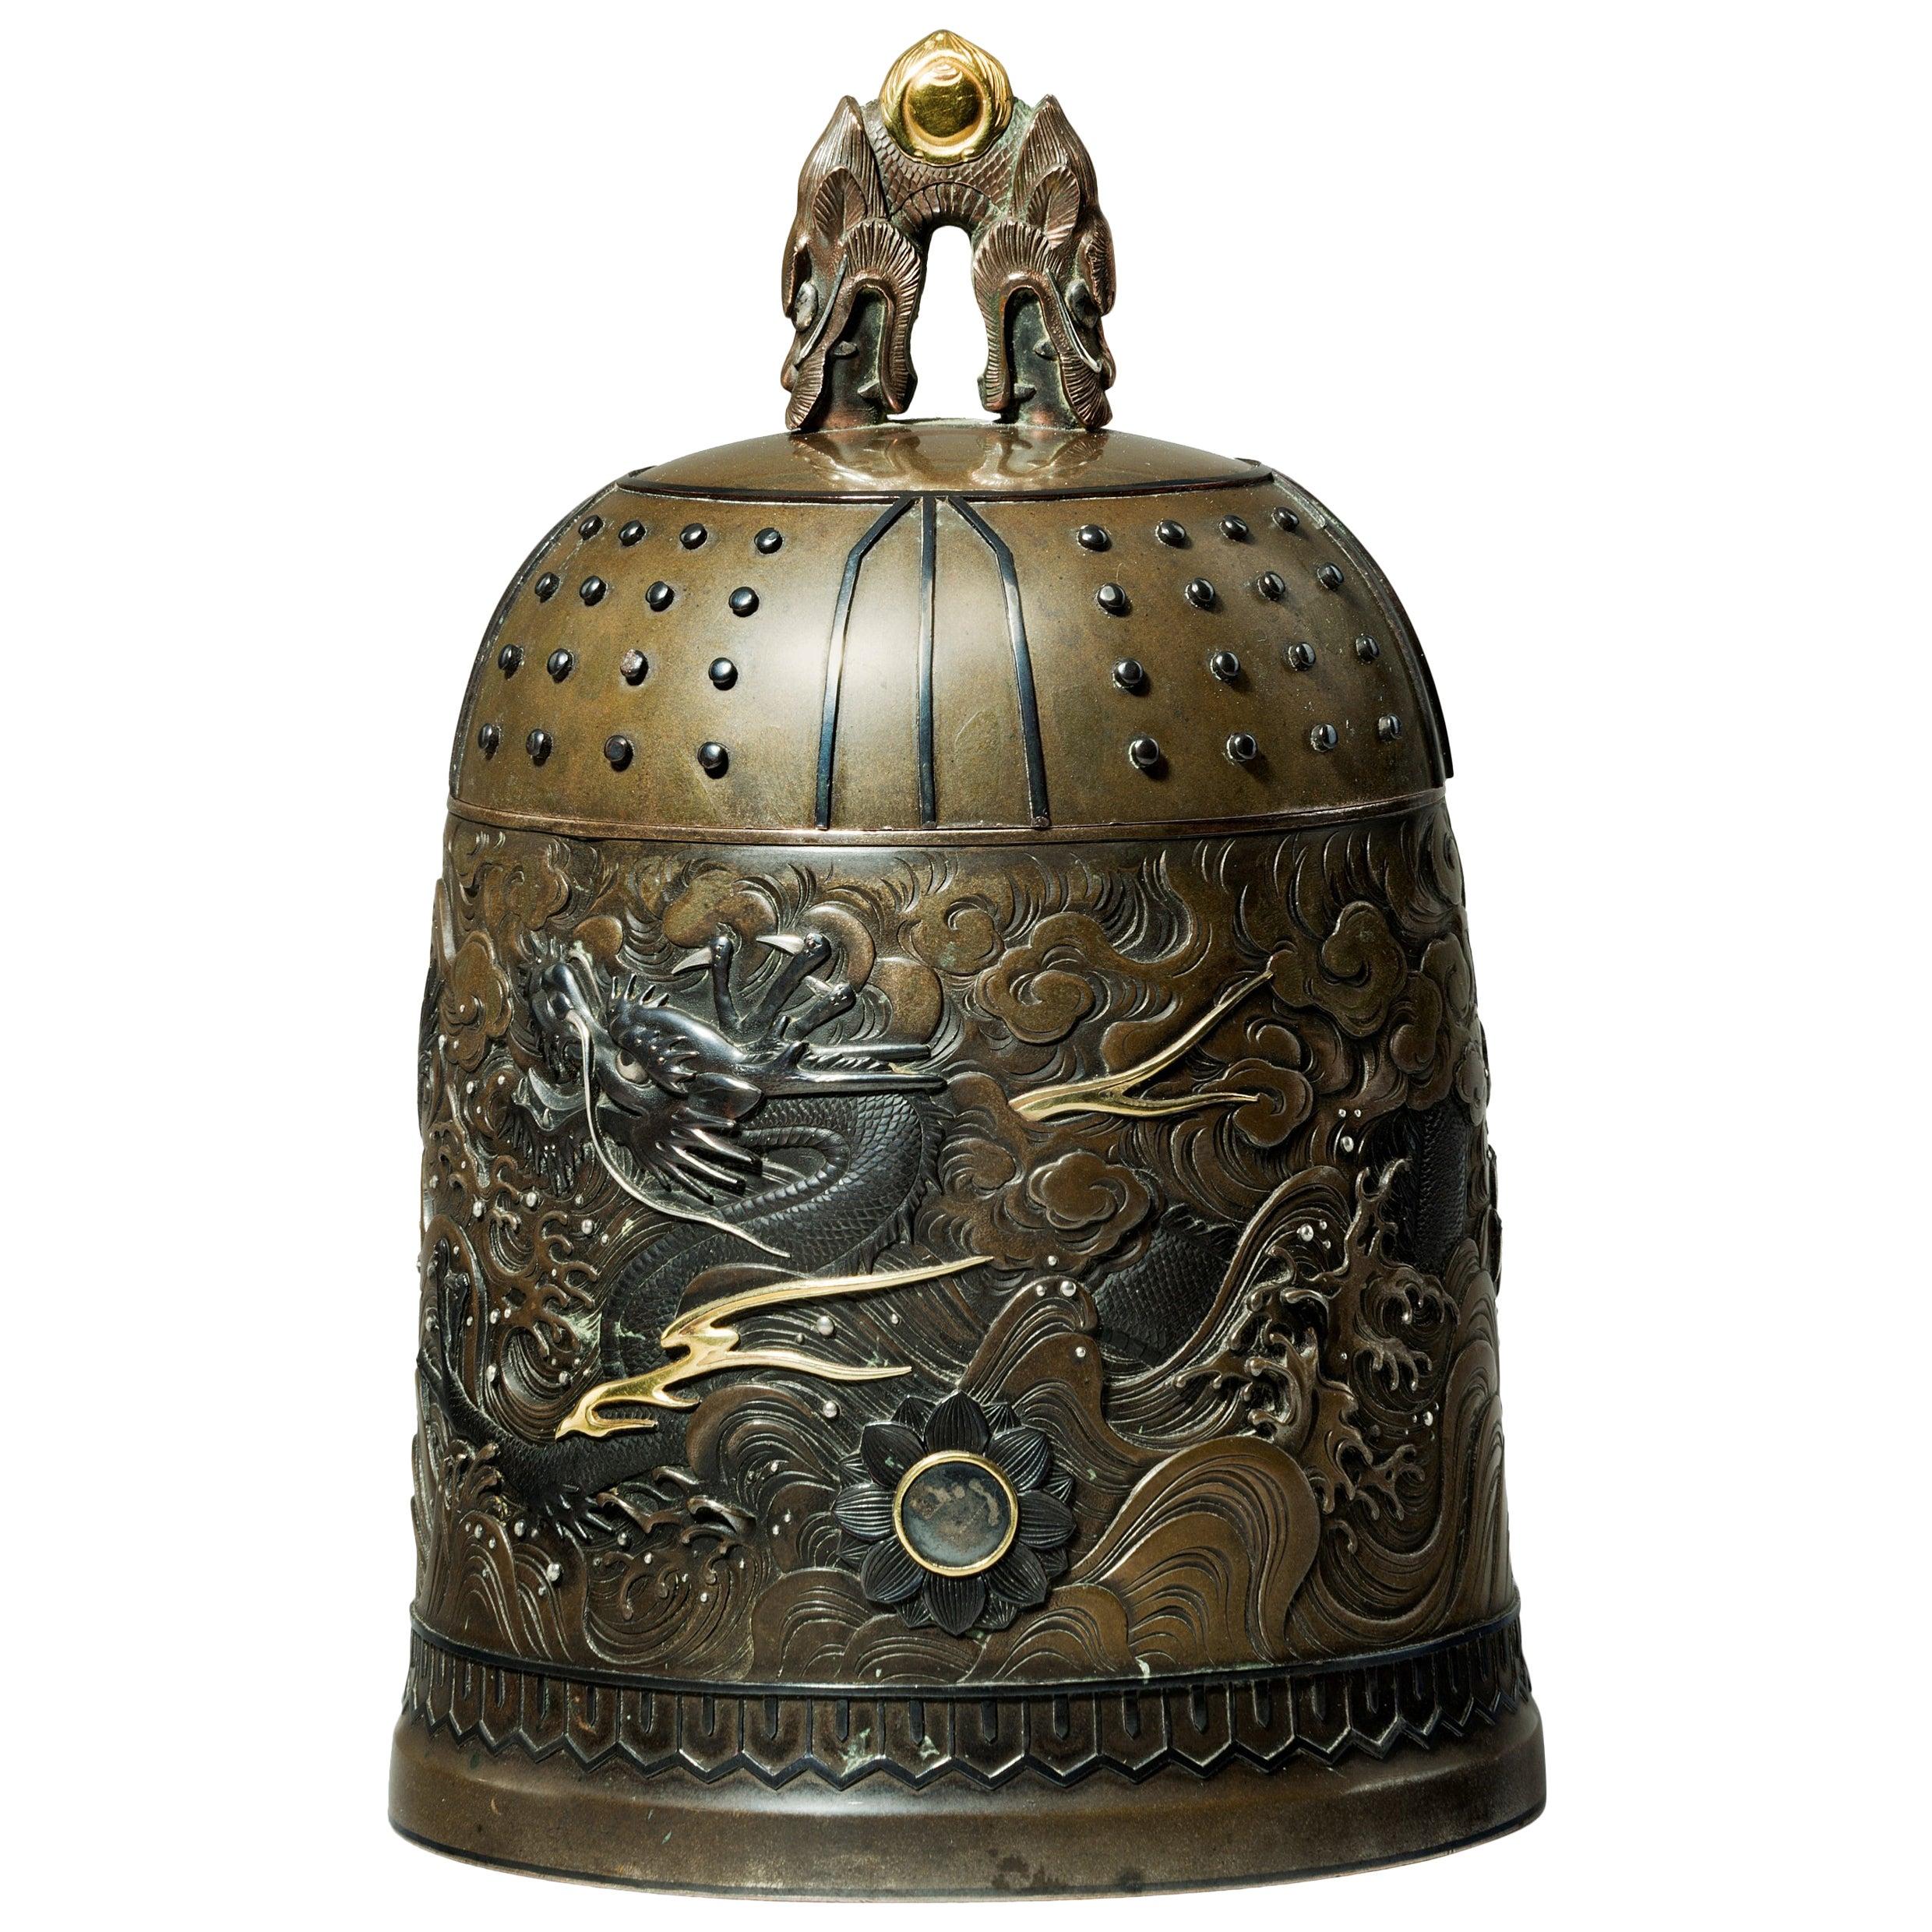 Outstanding Meiji Period Mixed Metal Bell Casket by the Nogowa Foundary